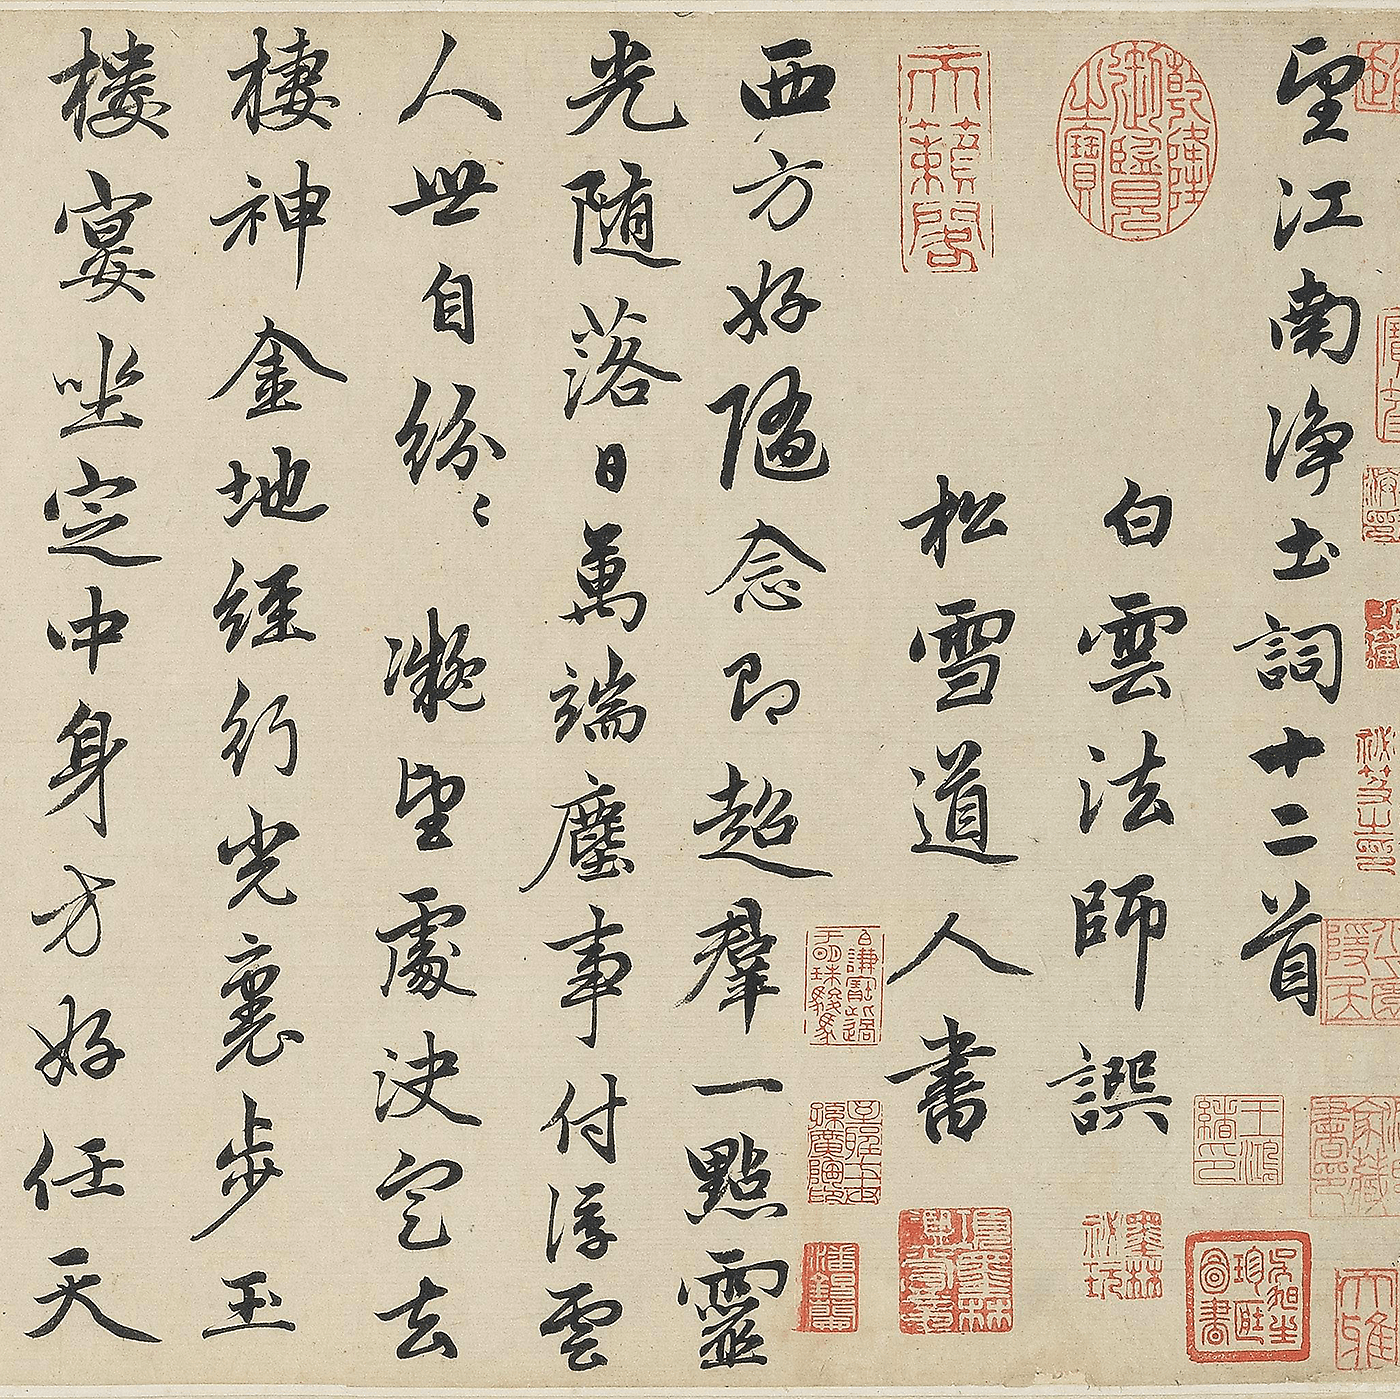 Ci-poems of the Pure Land in the Tune of Wang Jiangnan (detail)